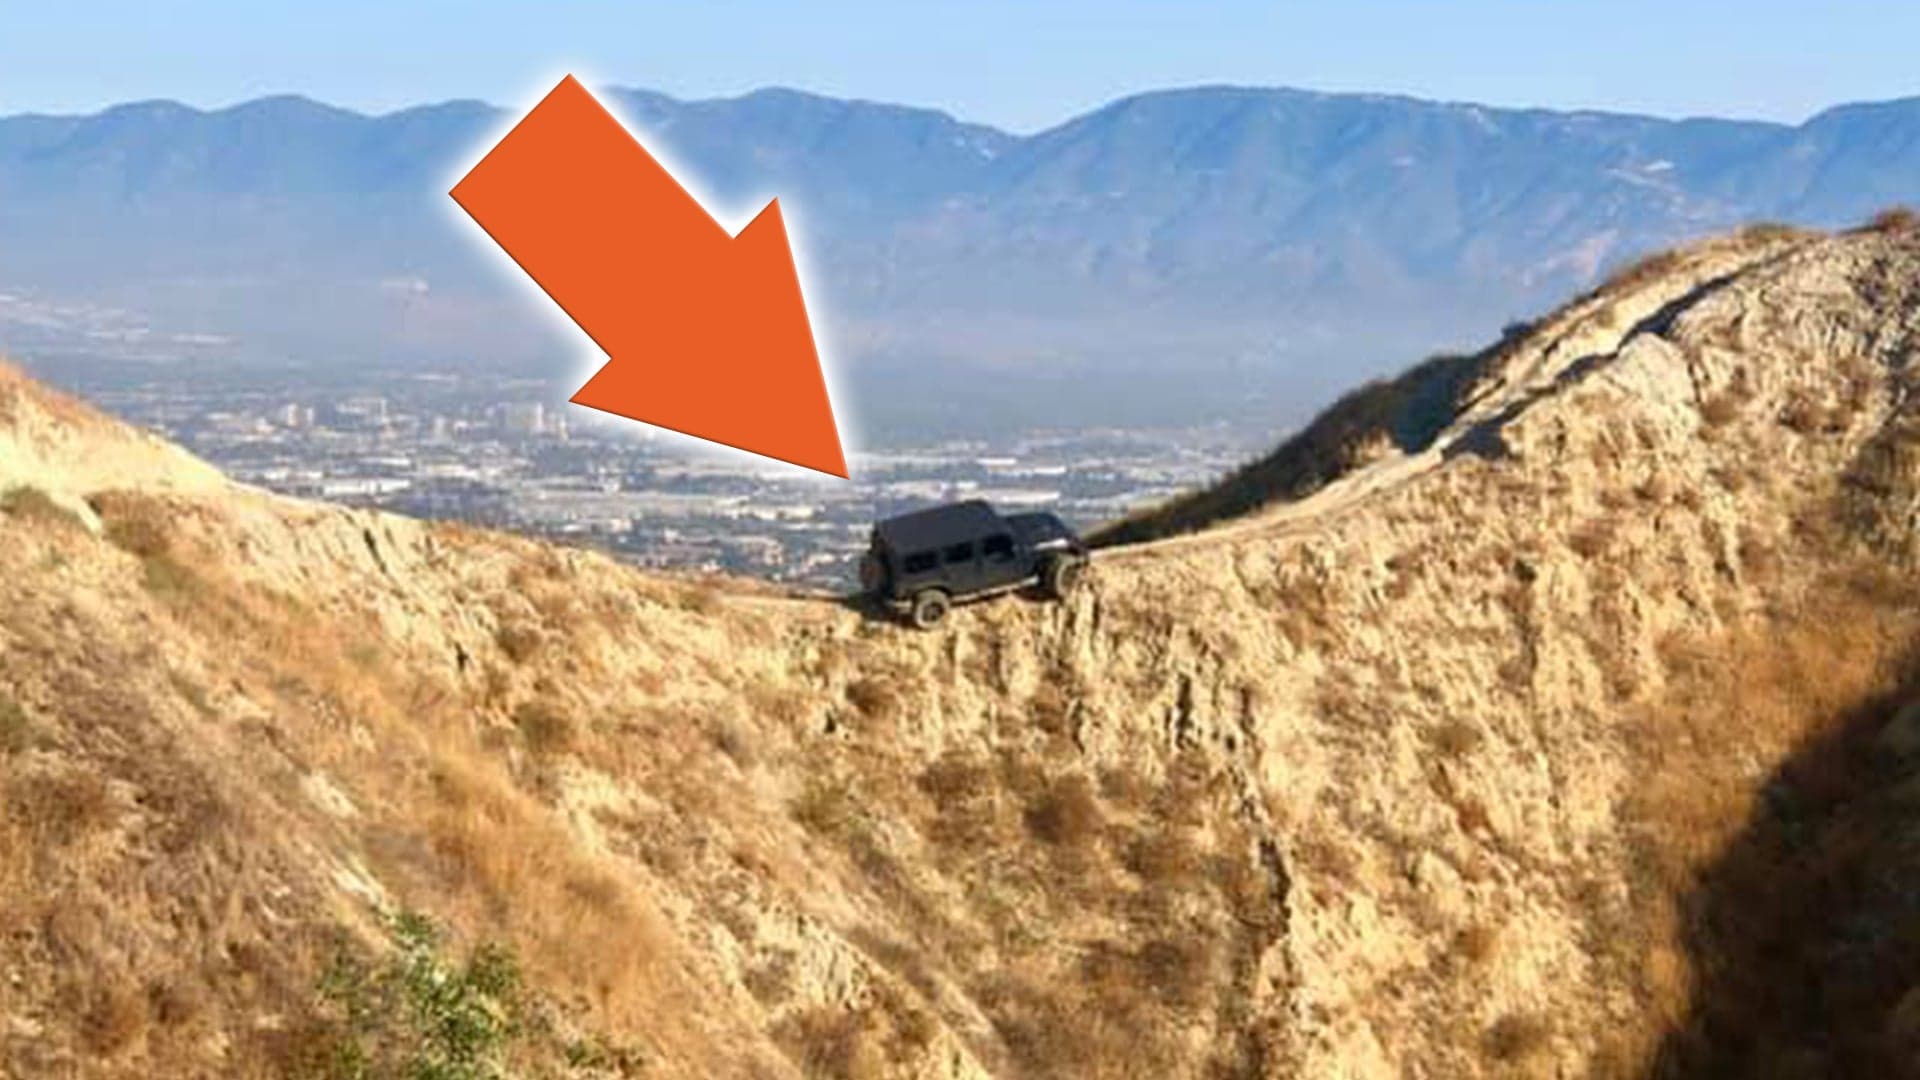 Ford Offered to Rescue That Jeep Wrangler Stuck on a Bike Trail